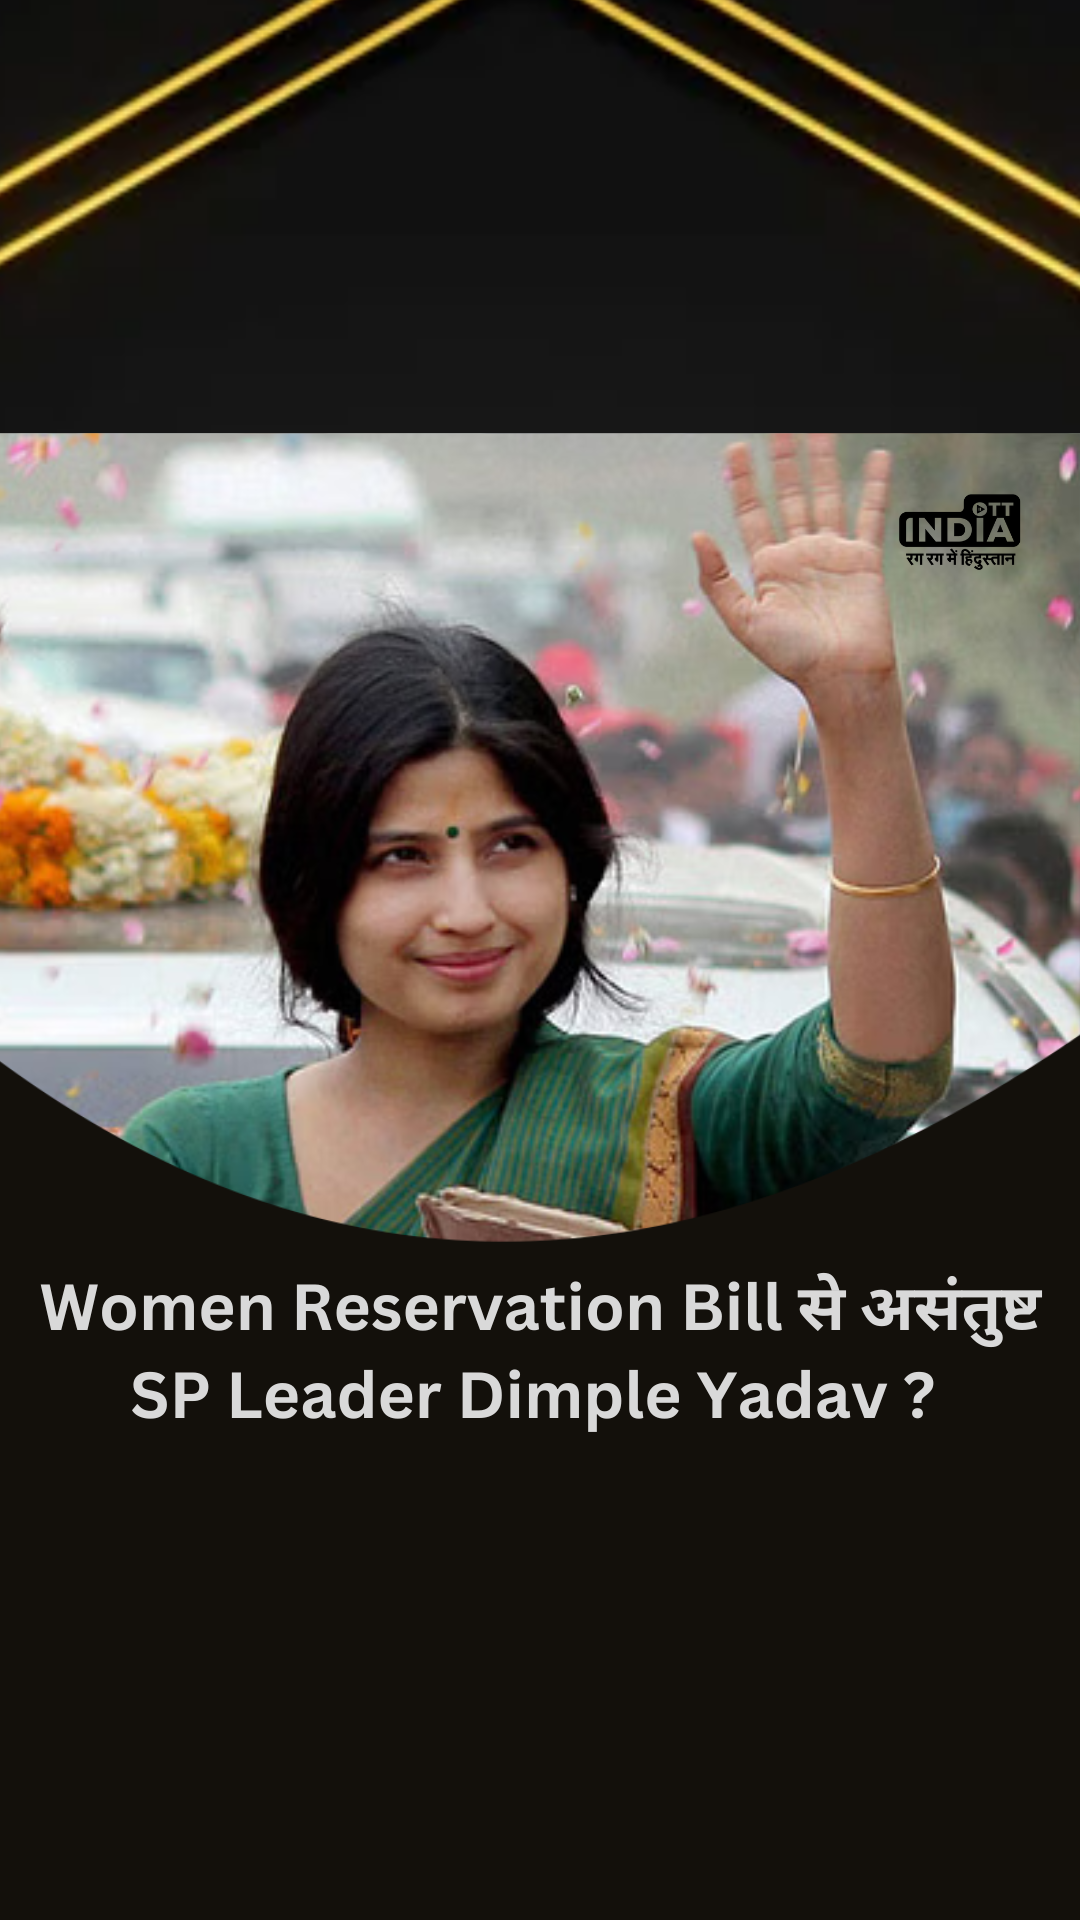 SP Leader Dimple Yadav dissatisfied with Women Reservation Bill?